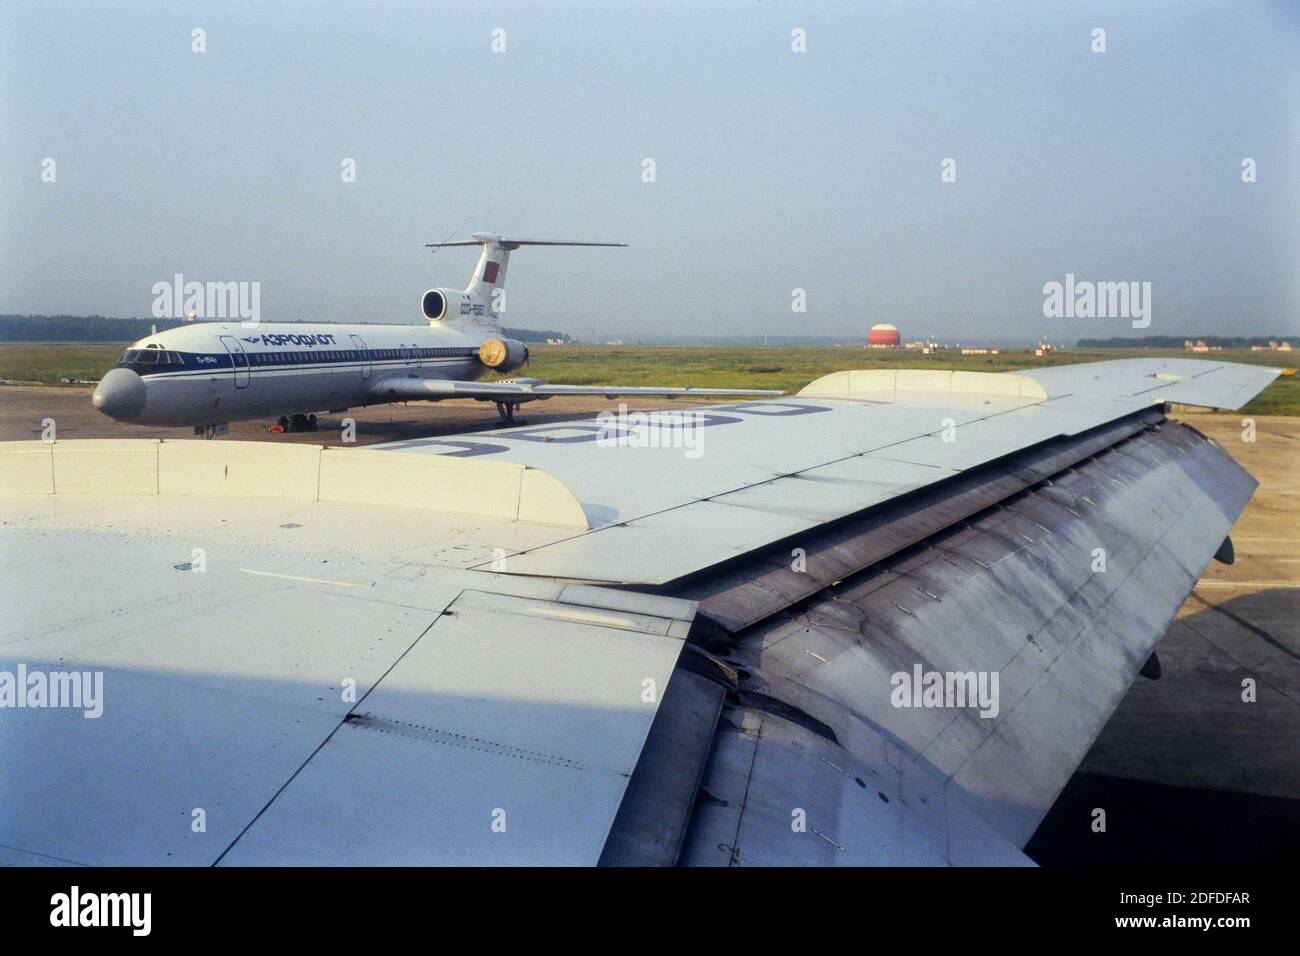 Airport, Moscow, CEI, former USSR, 1992 Stock Photo